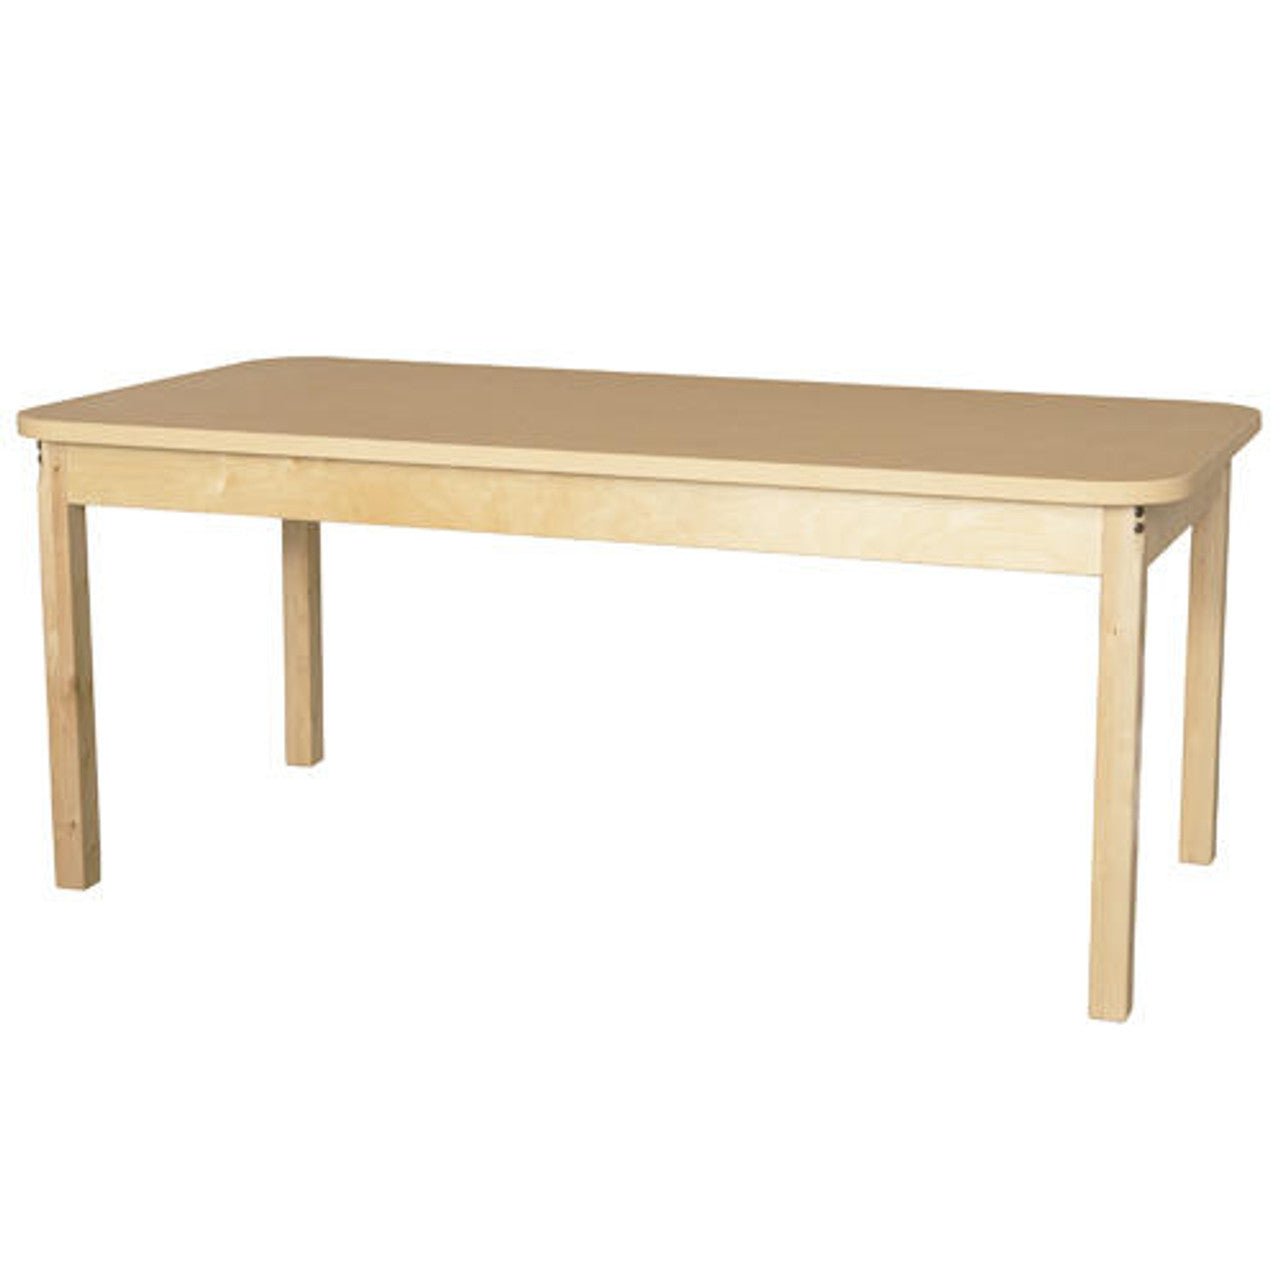 Rectangle High Pressure Laminate Table with Hardwood Legs- 20"